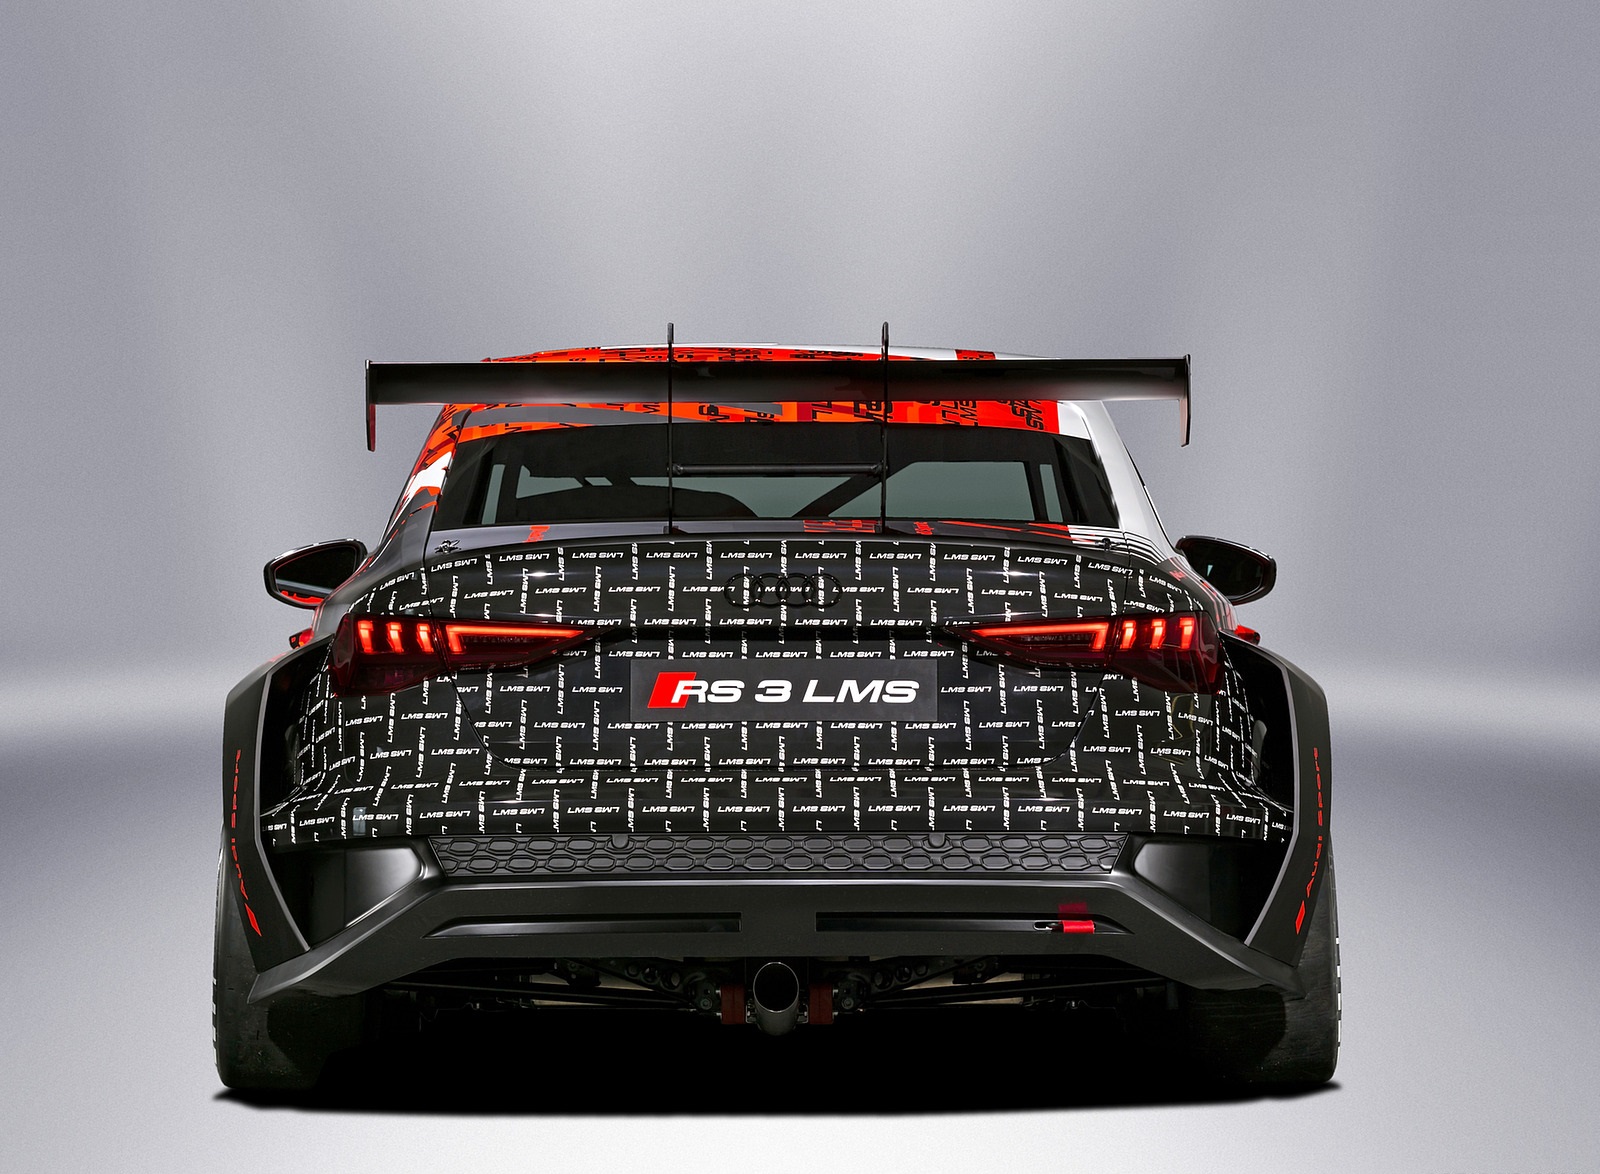 2021 Audi RS 3 LMS Rear Wallpapers #11 of 39